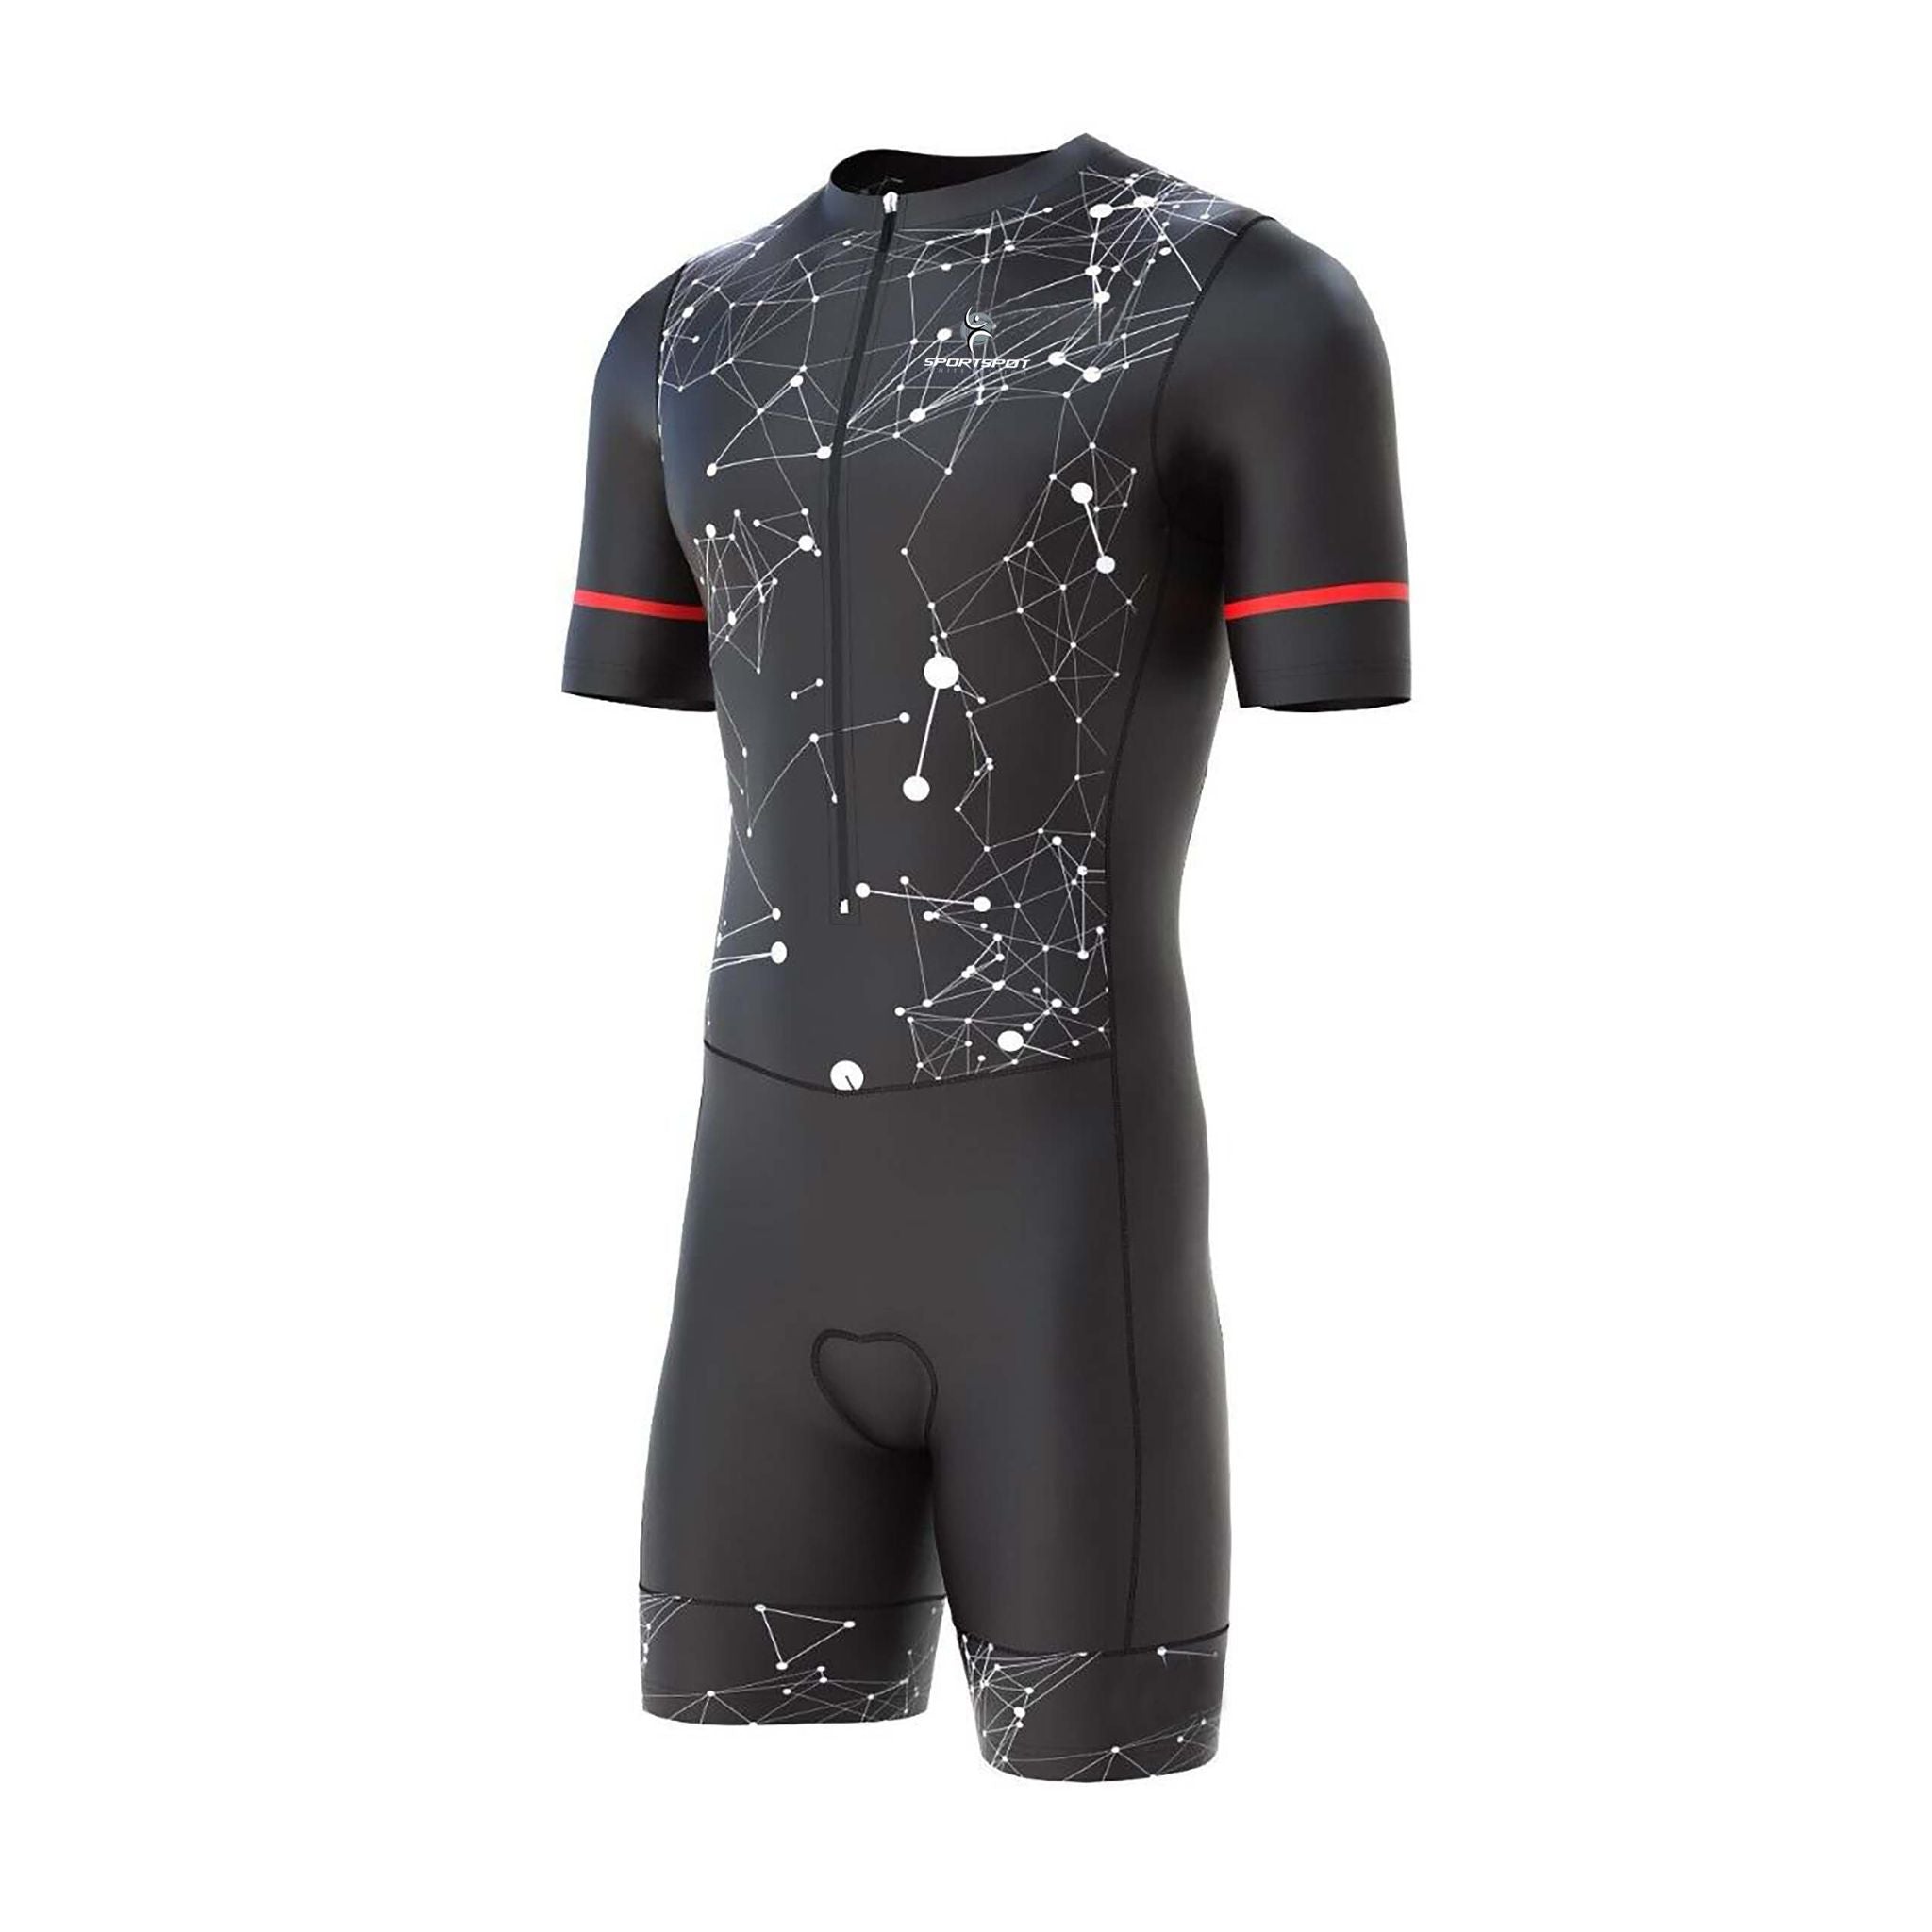 Men's Triathlon Compression Skinsuit for Cycling, Running, and Swimming with Gel Padding